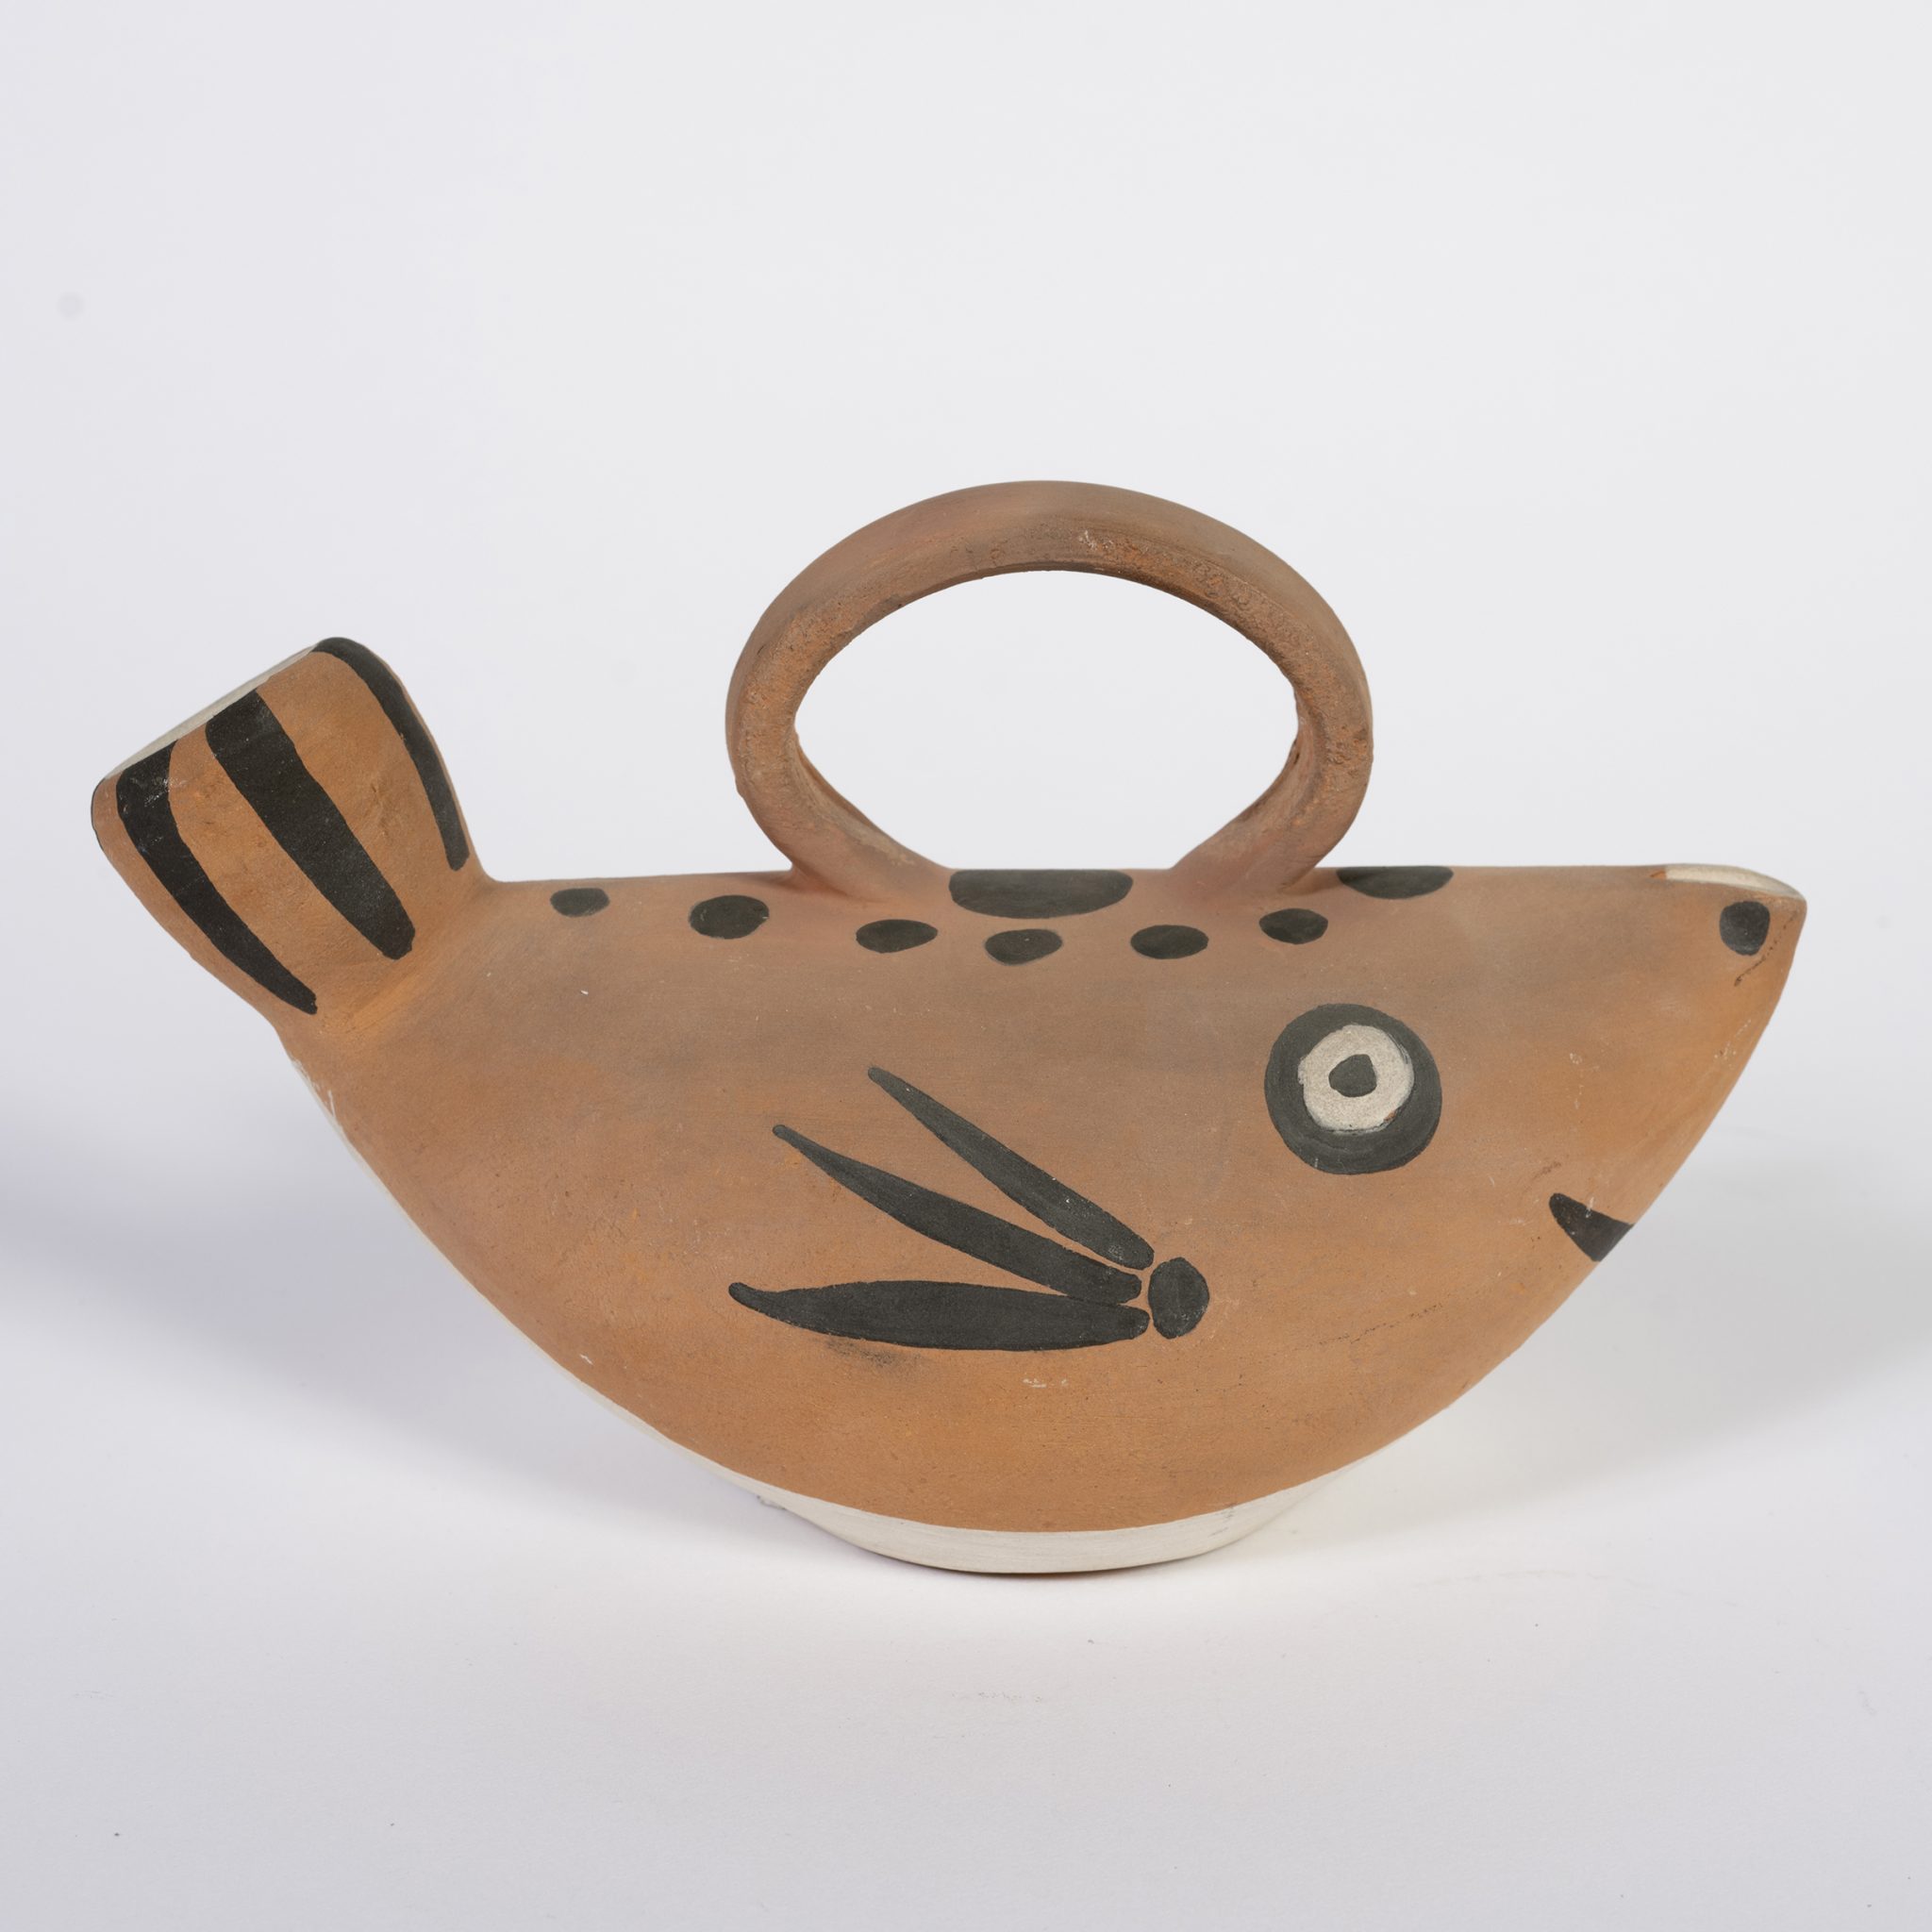 Pablo Picasso: 25 Years of Edition Ceramics from the Rosenbaum Collection